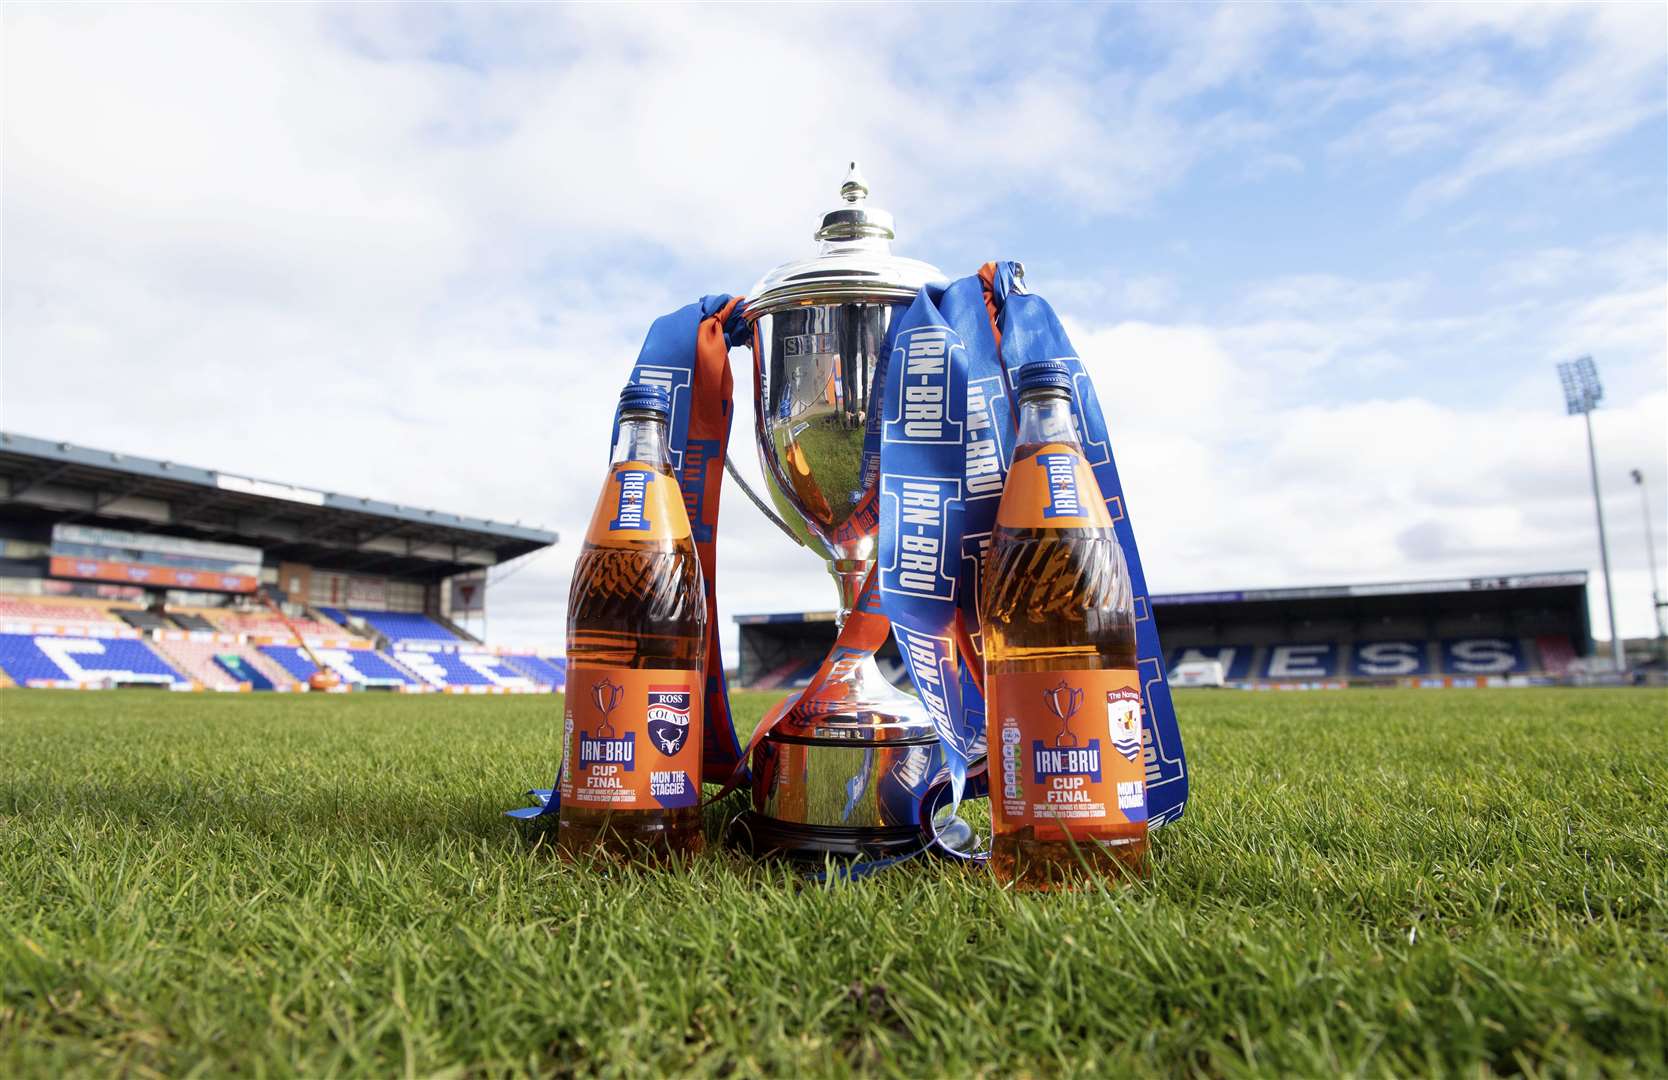 The Irn-Bru Cup final was at Caledonian Stadium in Inverness.